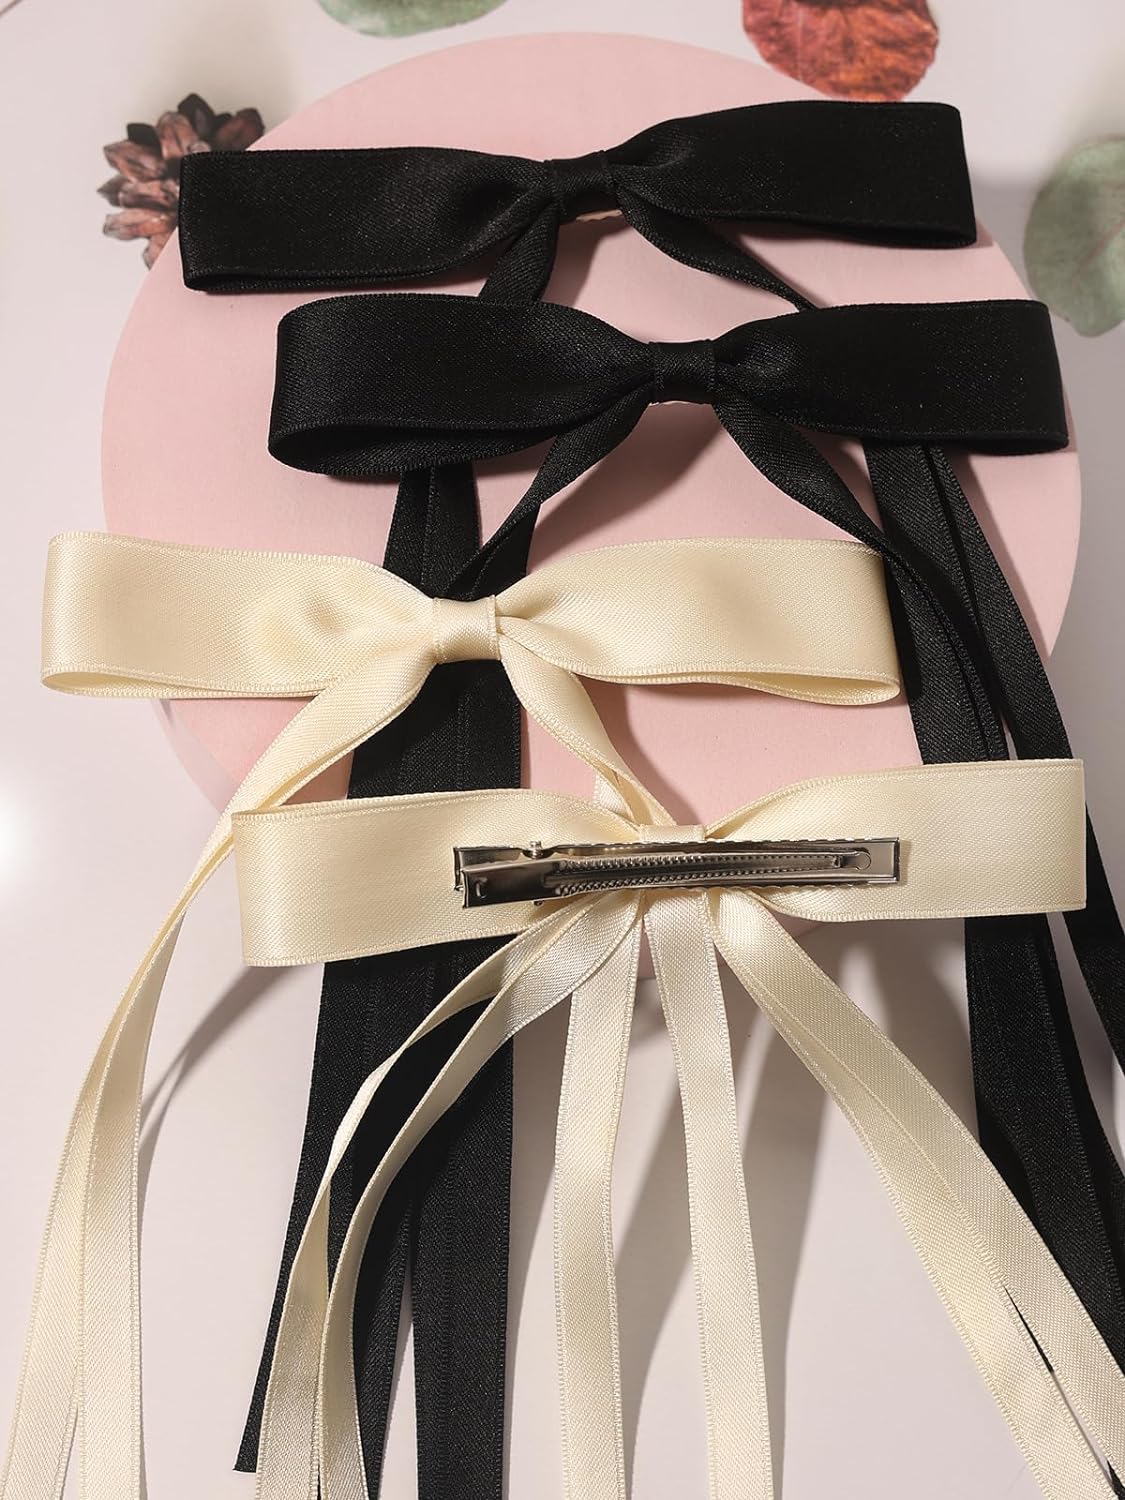 4Pcs Hair Clips for Women Tassel Ribbon Bowknot with Long Tail, Clip Girl, Solid Accessories Barrettes Claw Bow (Black&Beige)